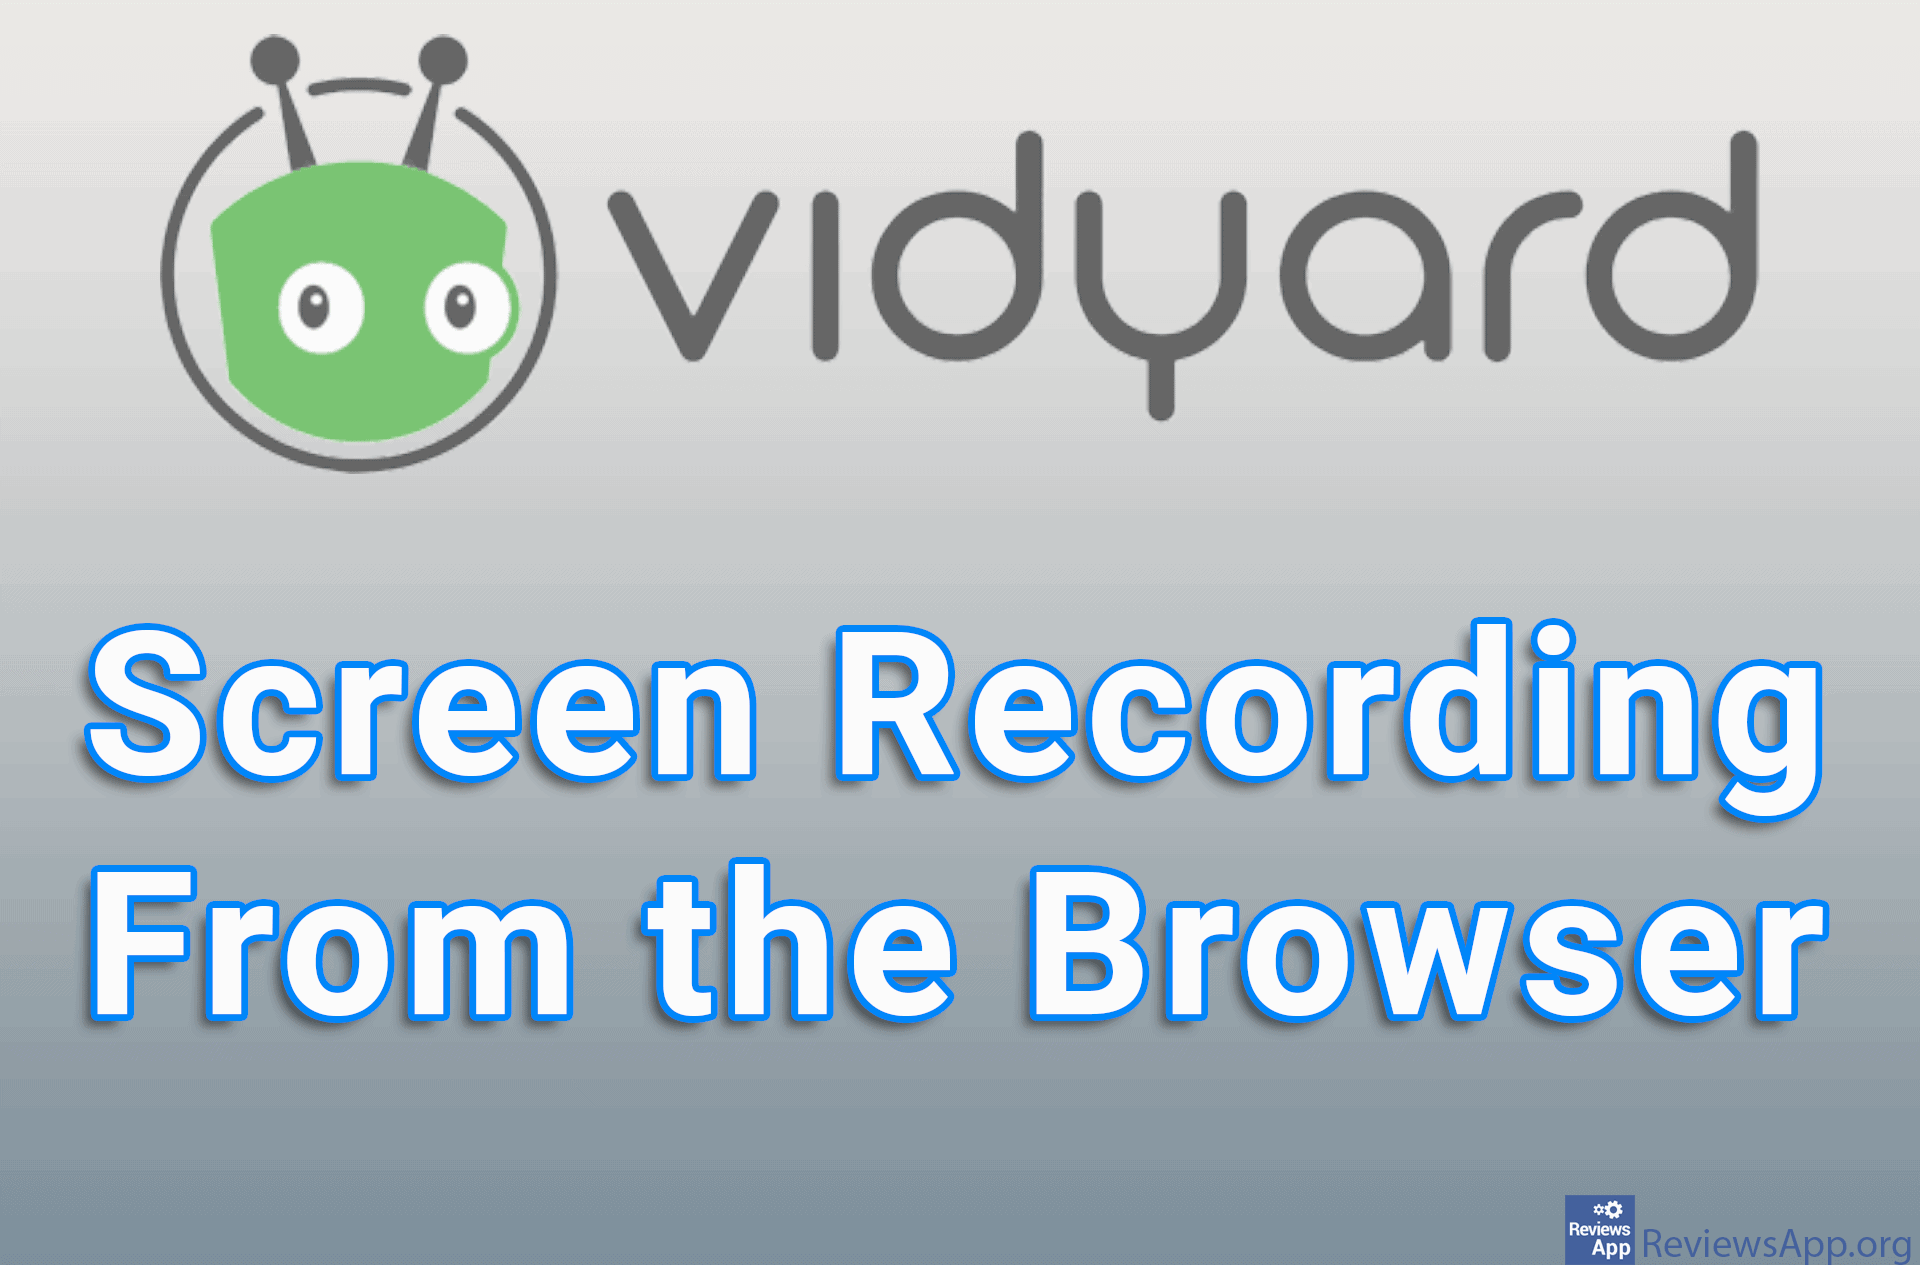 Vidyard – Screen Recording From the Browser